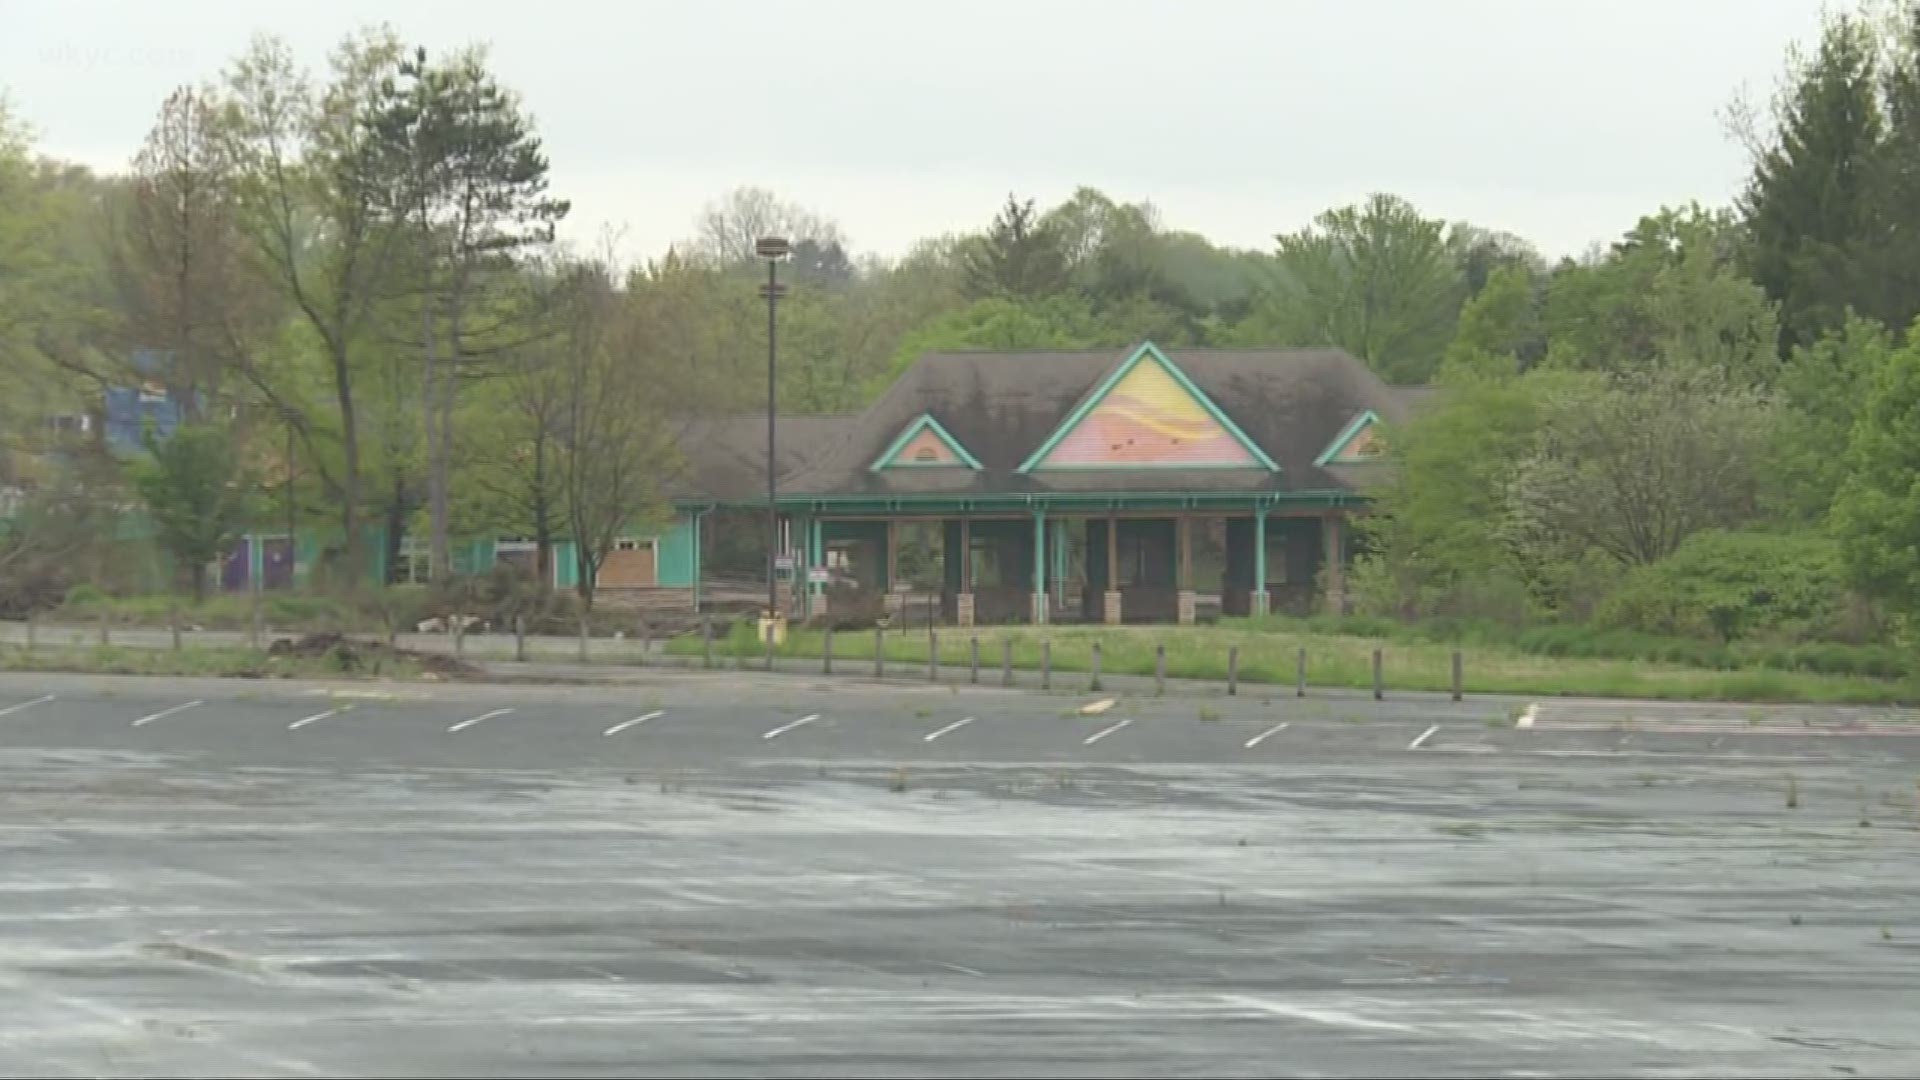 New life could be coming to the former Geauga Lake site